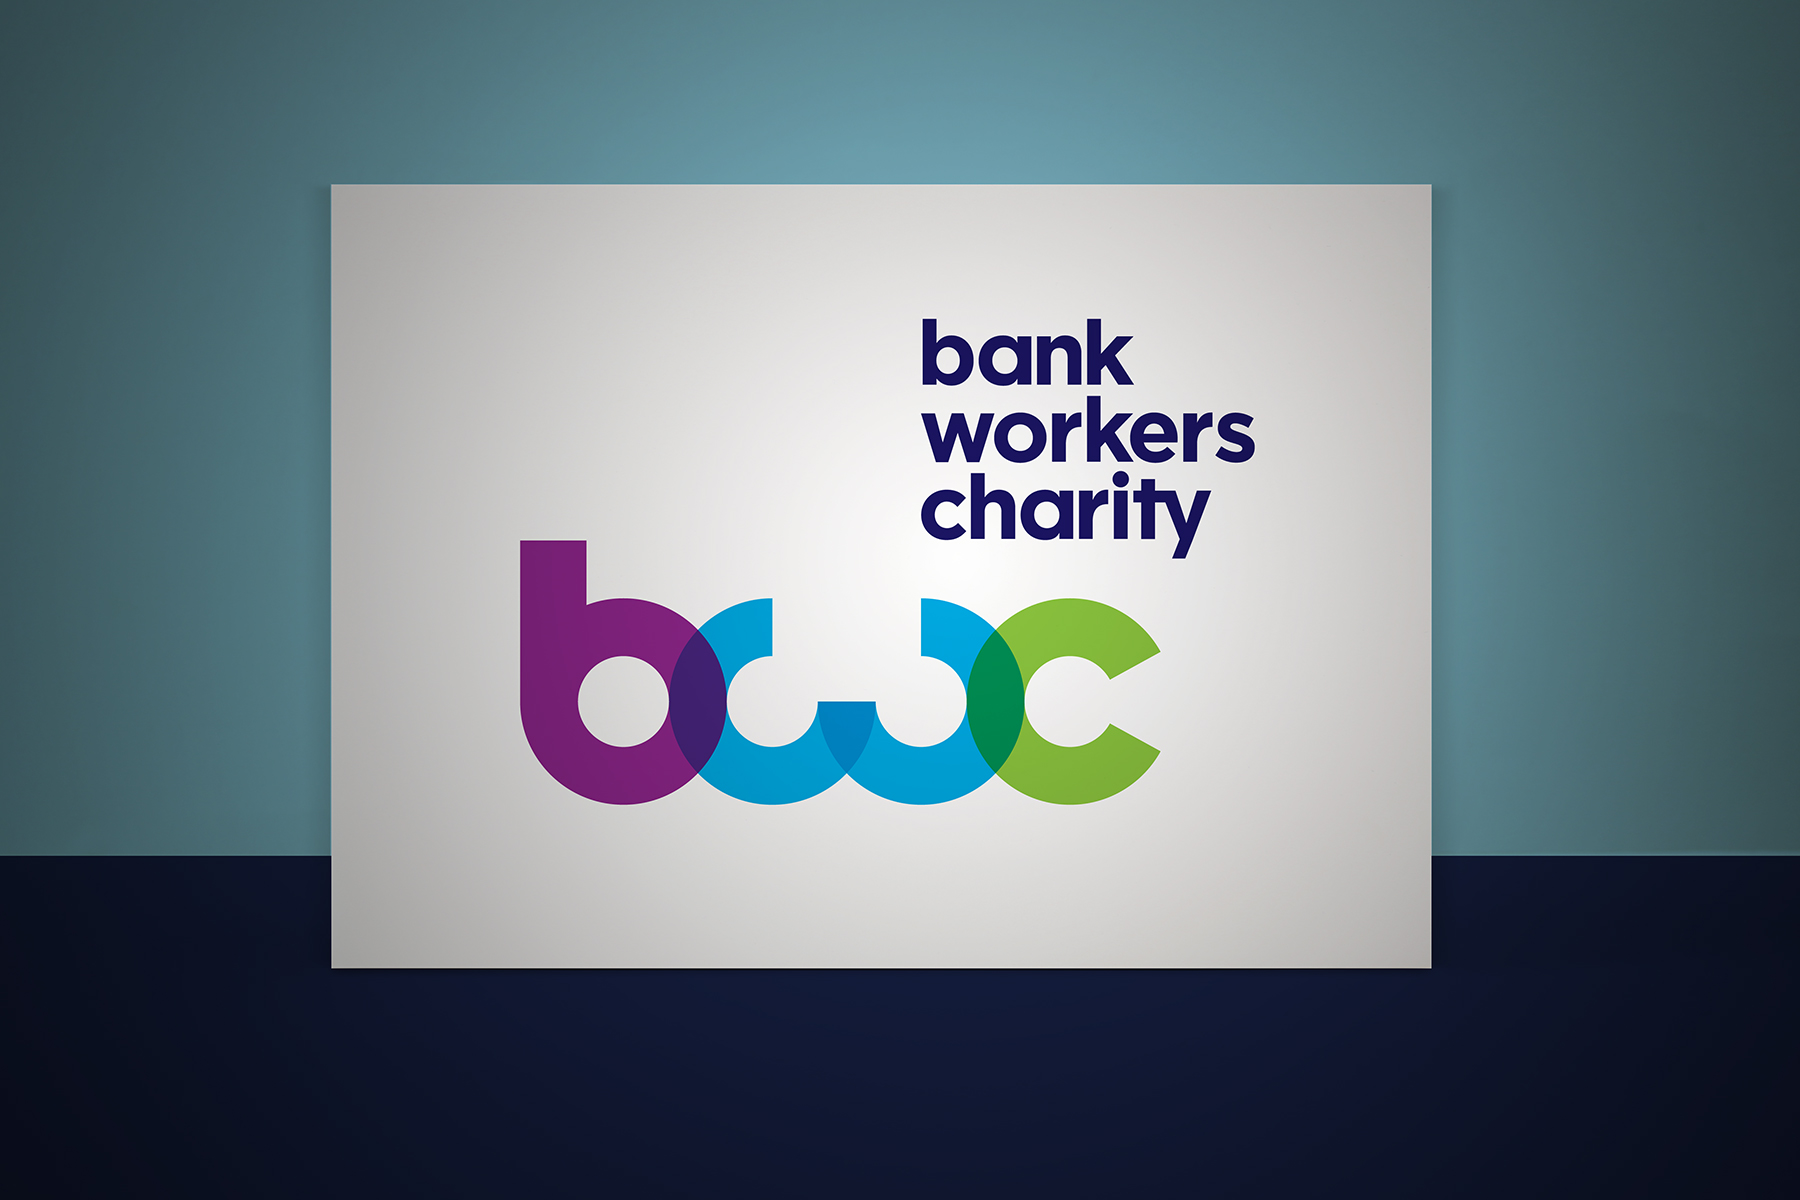 The Bank Workers Charity brand mark is constructed purely out of circular shapes. The transparency and colour creates a modern yet approachable feel.